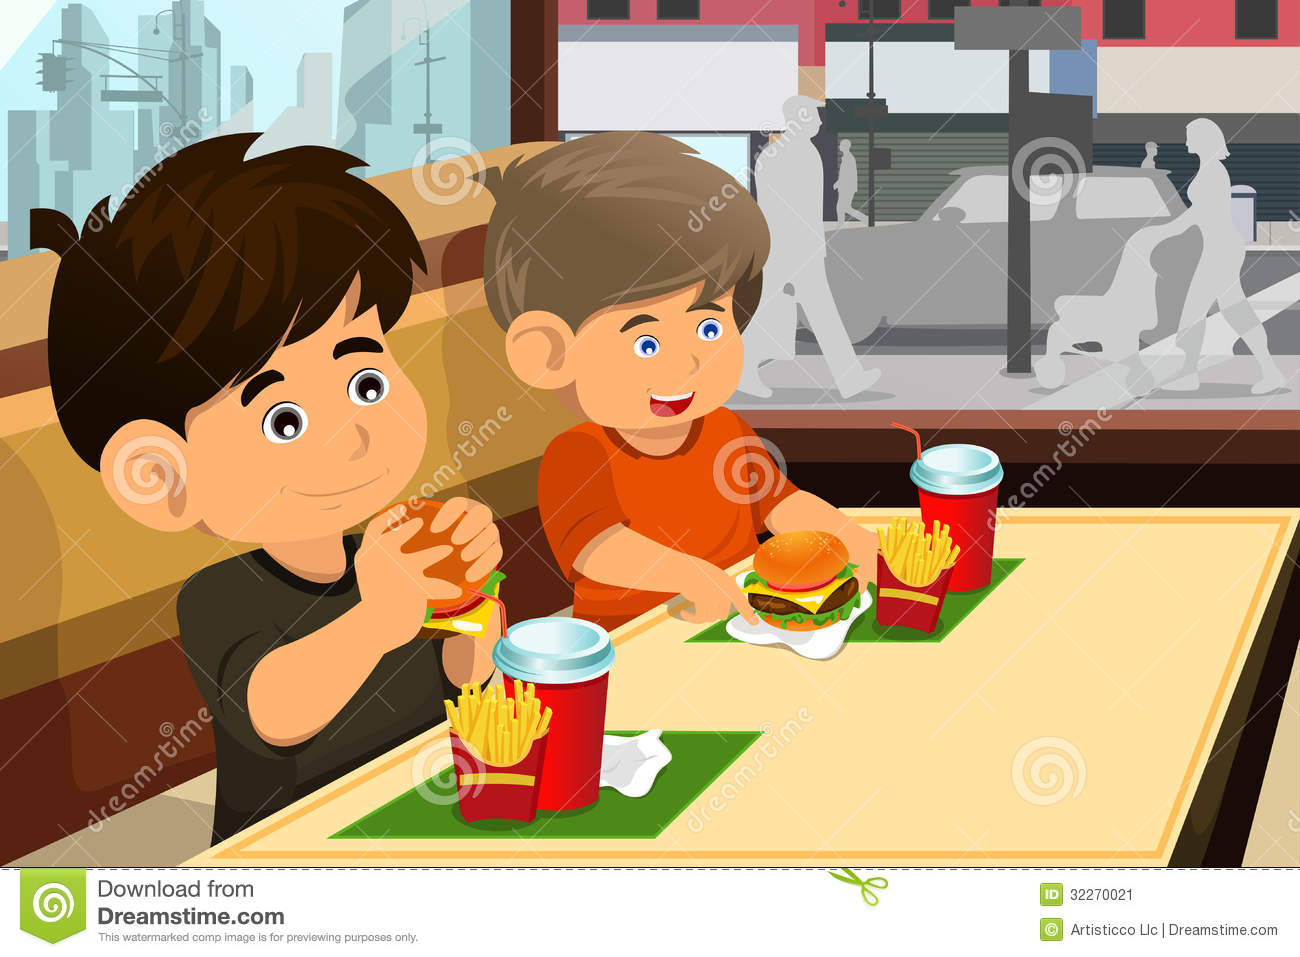 Of Happy Kids Eating A Hamburger And Fries In A Fast Food Restaurant